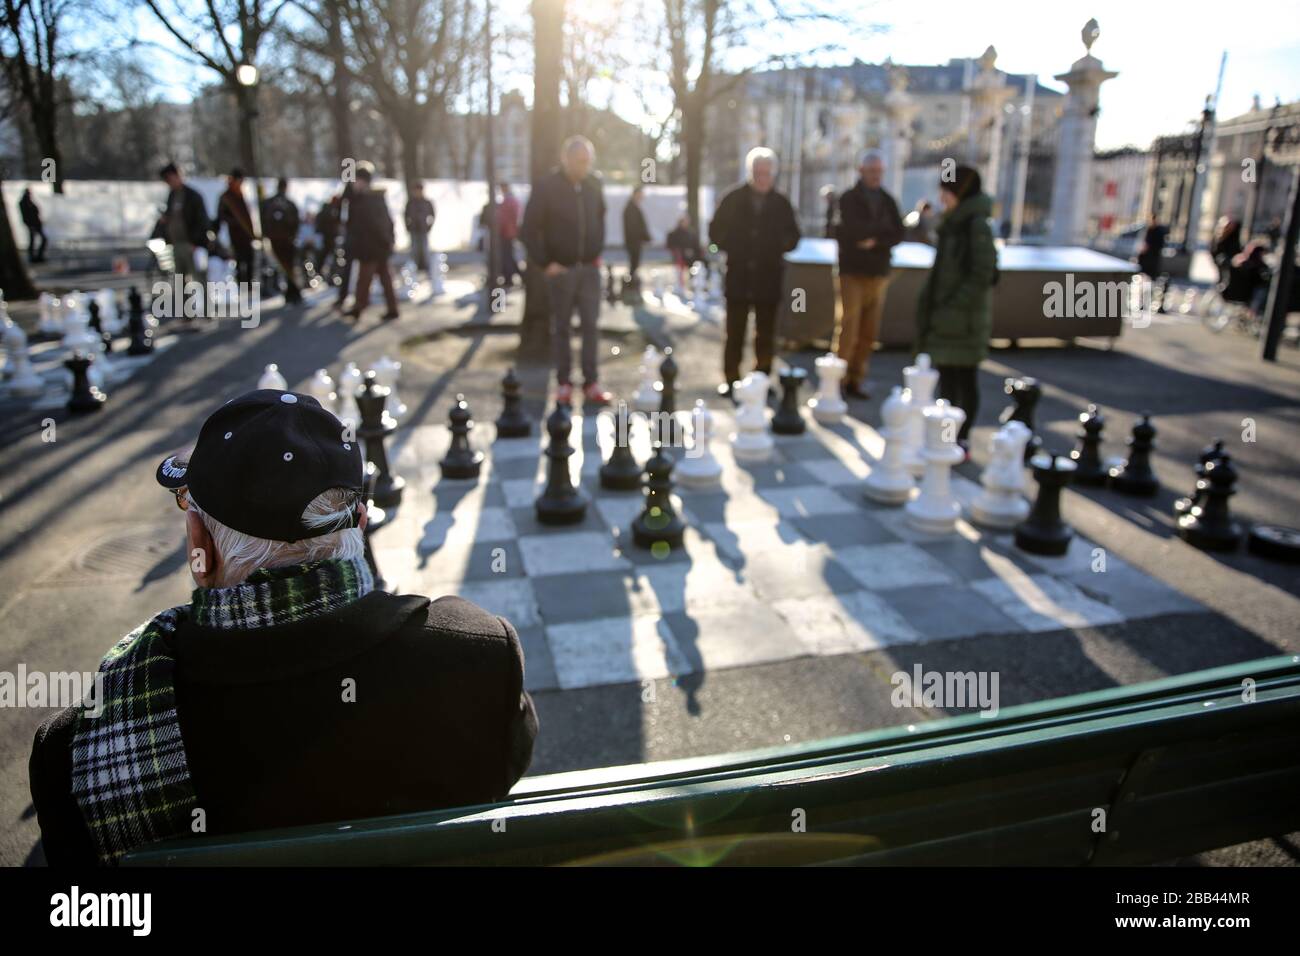 Men Playing Chess On A Giant Chess Board In The Parc Des Bastions, Geneva, Switzerland Stock Photo